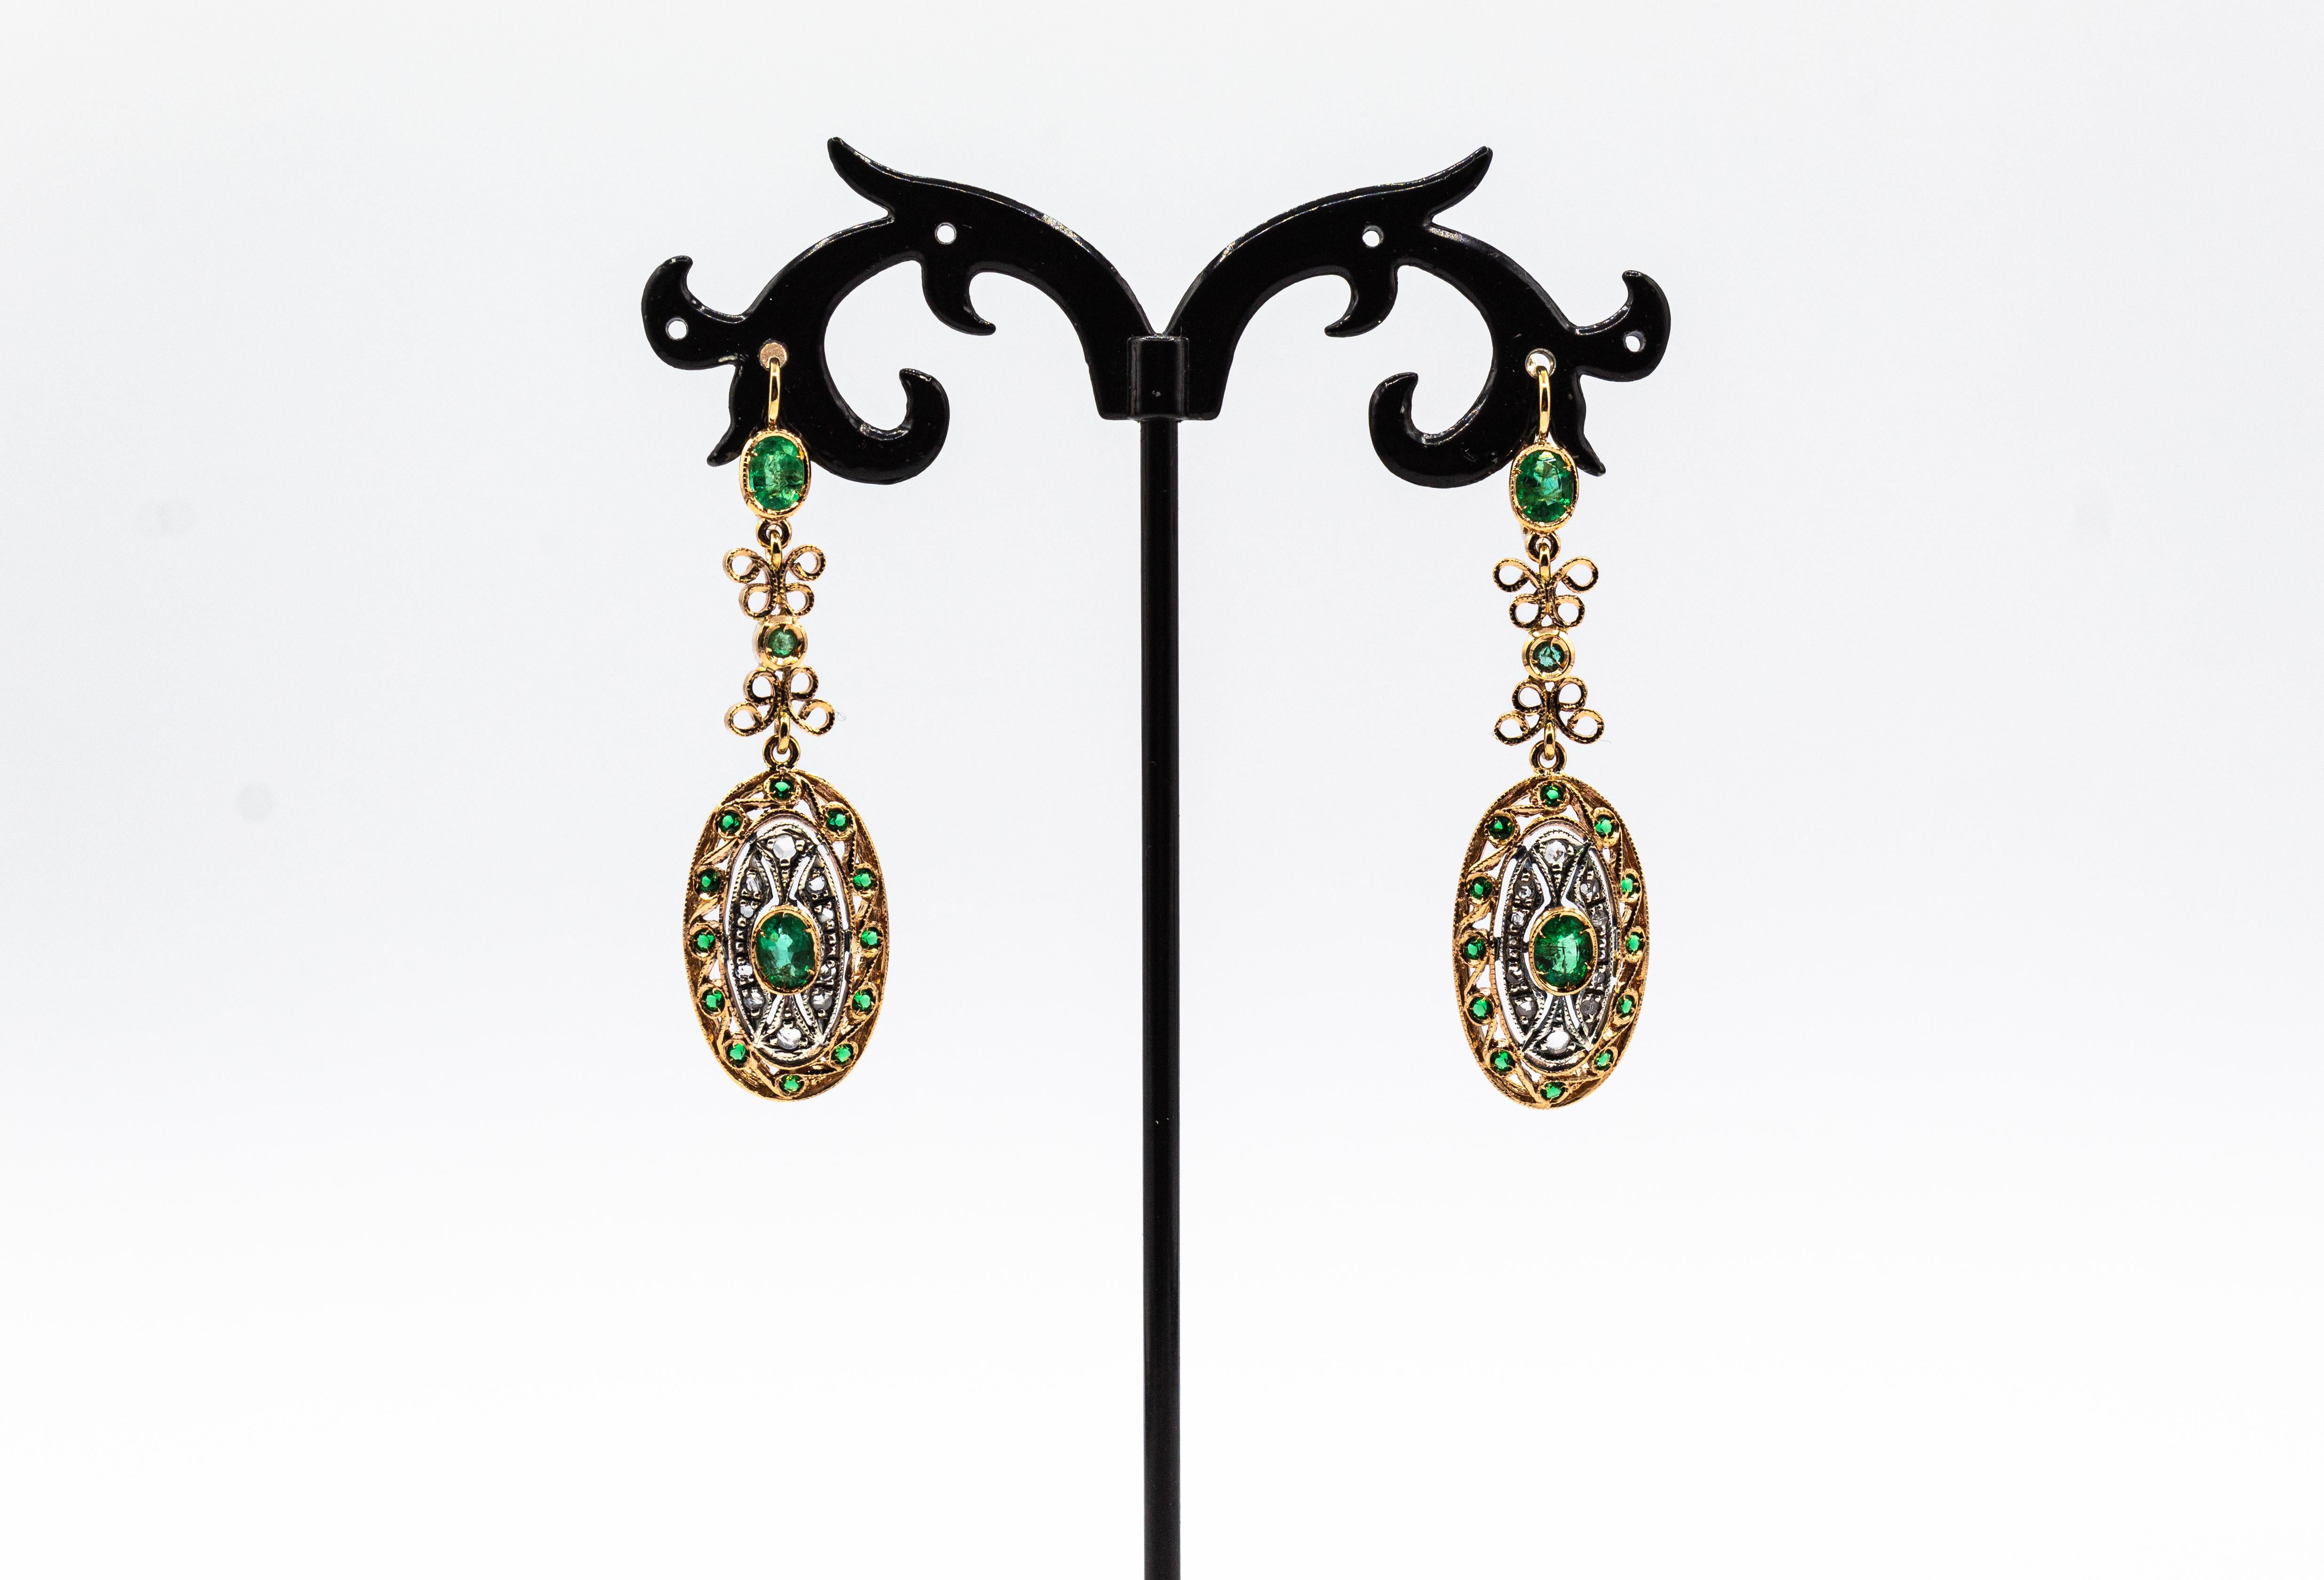 These Lever-Back Earrings are made of 9K Yellow Gold and Sterling Silver.
These Earrings have 0.30 Carats of White Rose Cut Diamonds.
These Earrings have also 1.00 Carat of Modern Round Cut and Oval Cut Emeralds.

These Earrings are available also